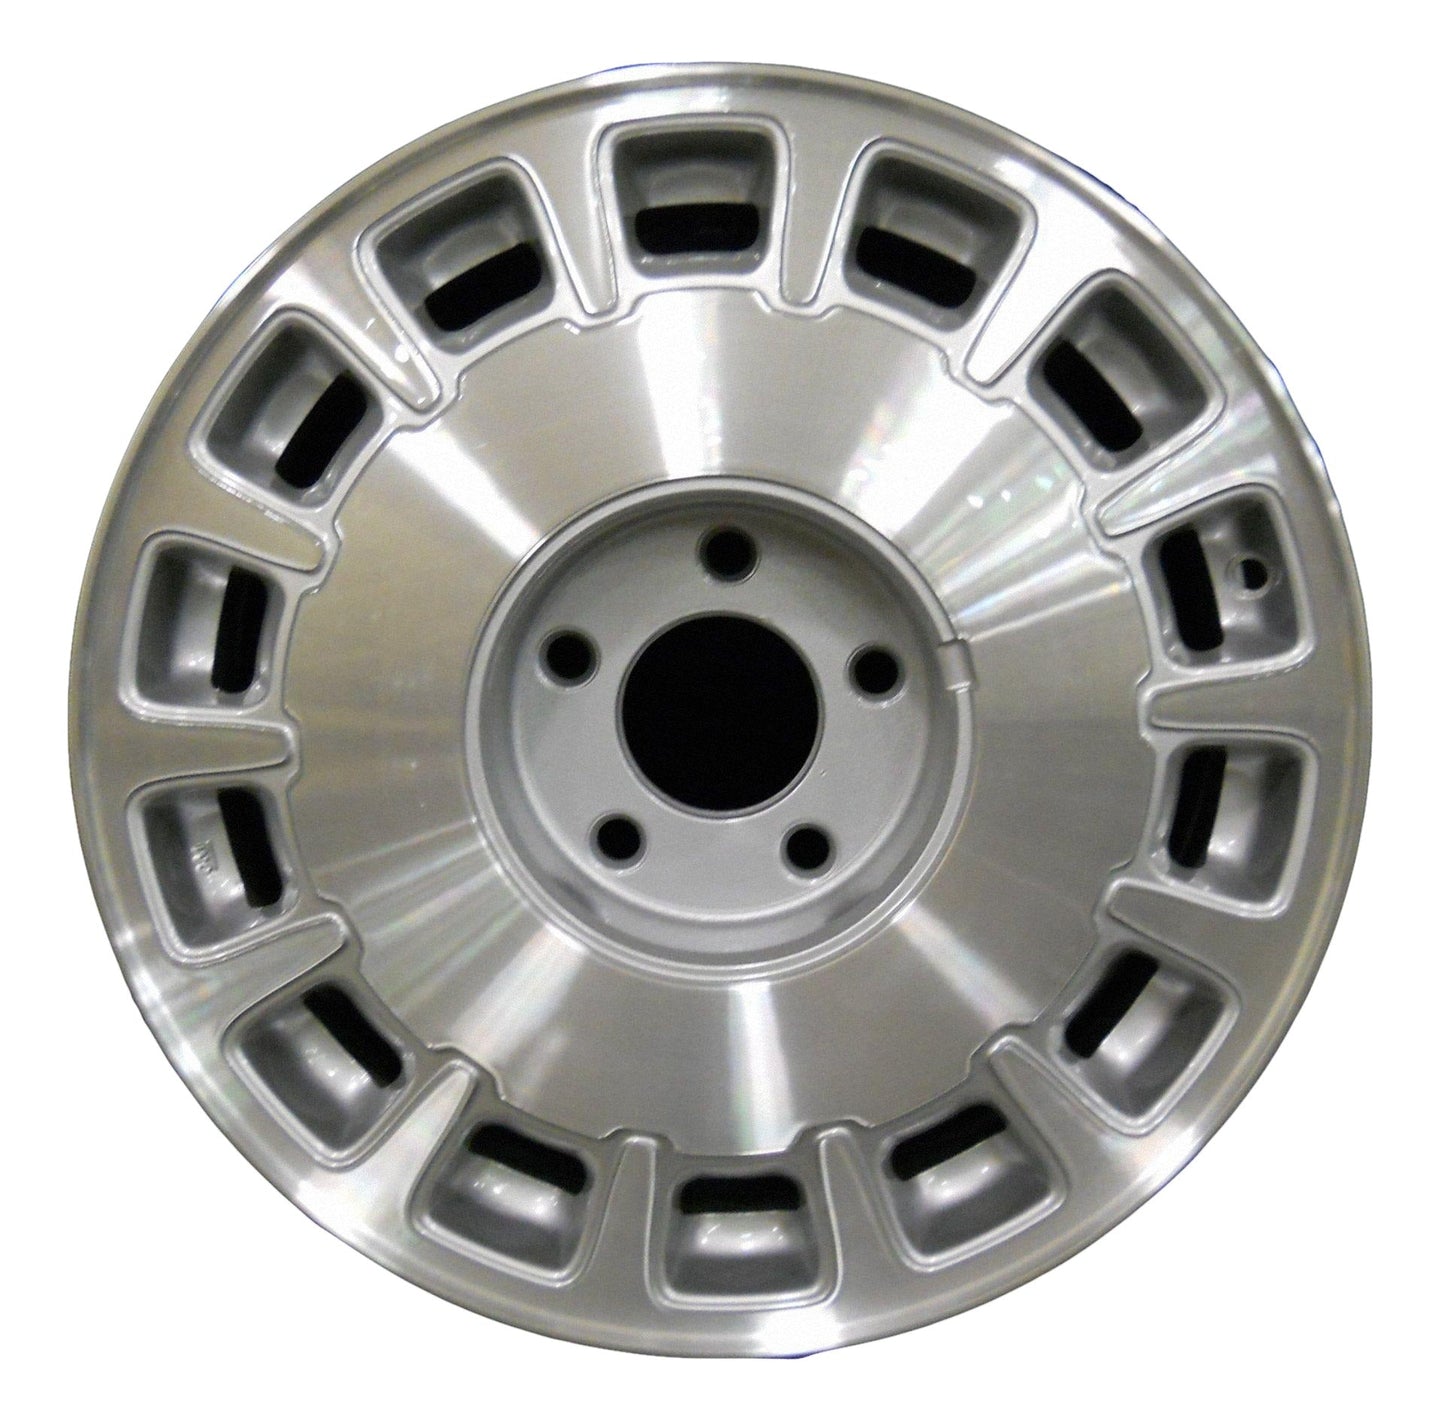 Cadillac Deville  1996, 1997, 1998, 1999 Factory OEM Car Wheel Size 16x7 Alloy WAO.4525.PS01.MA